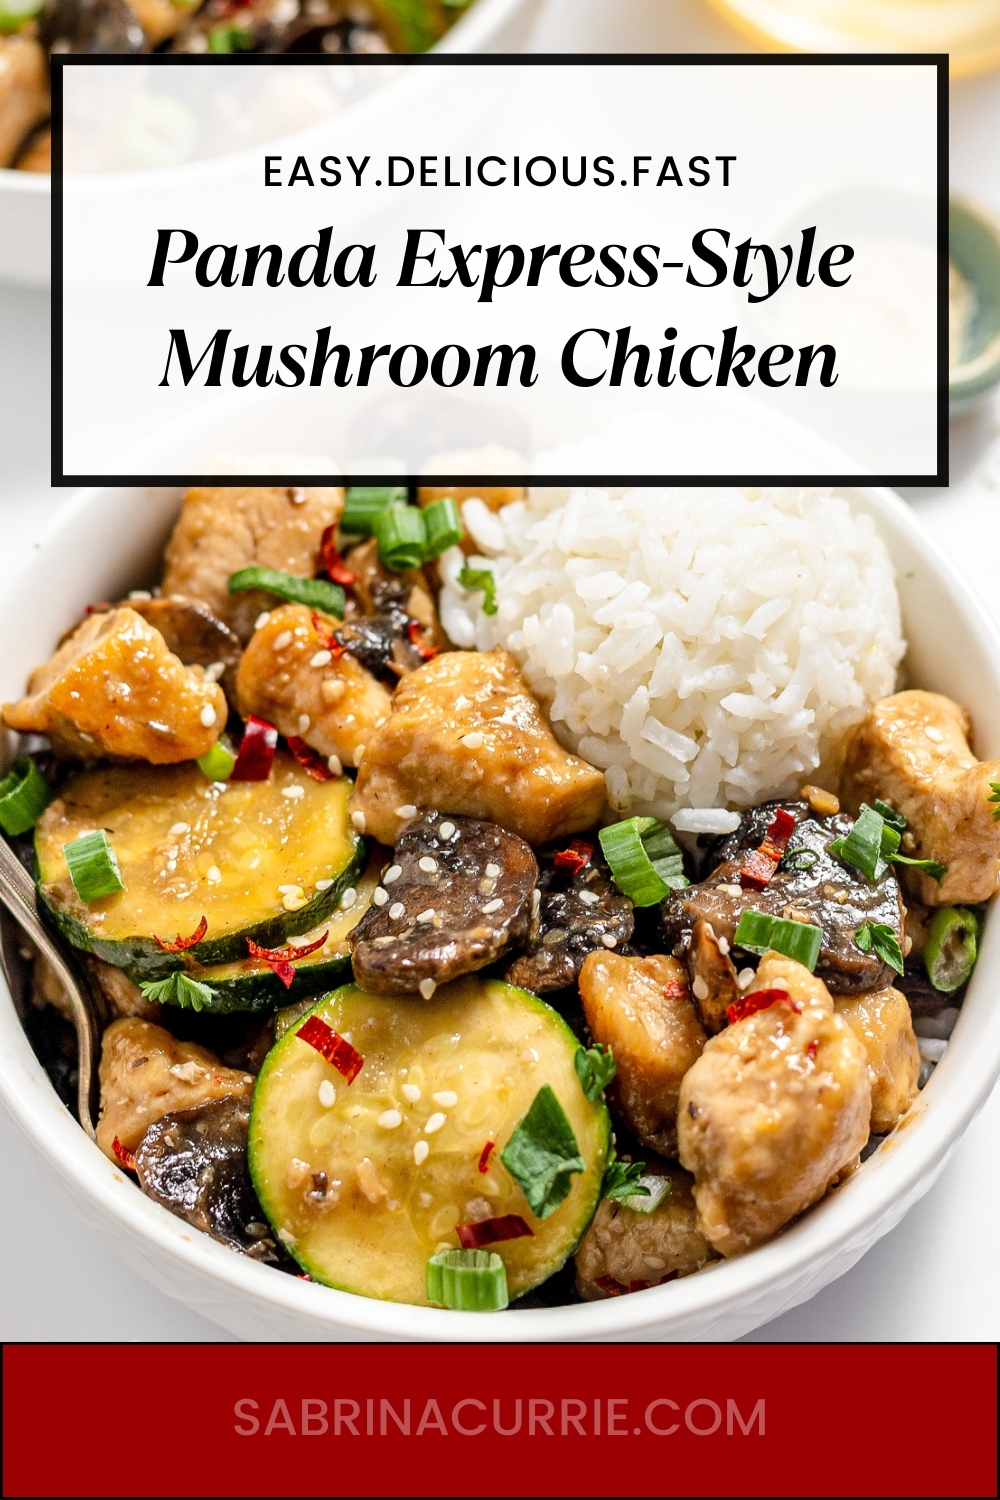 White bowl of saucy glazed mushrooms, chicken and zucchini with a round scoop of rice on top. The title, " delicious. easy. fresh. Panda Express-style mushroom chicken", is on a white banner at the top.